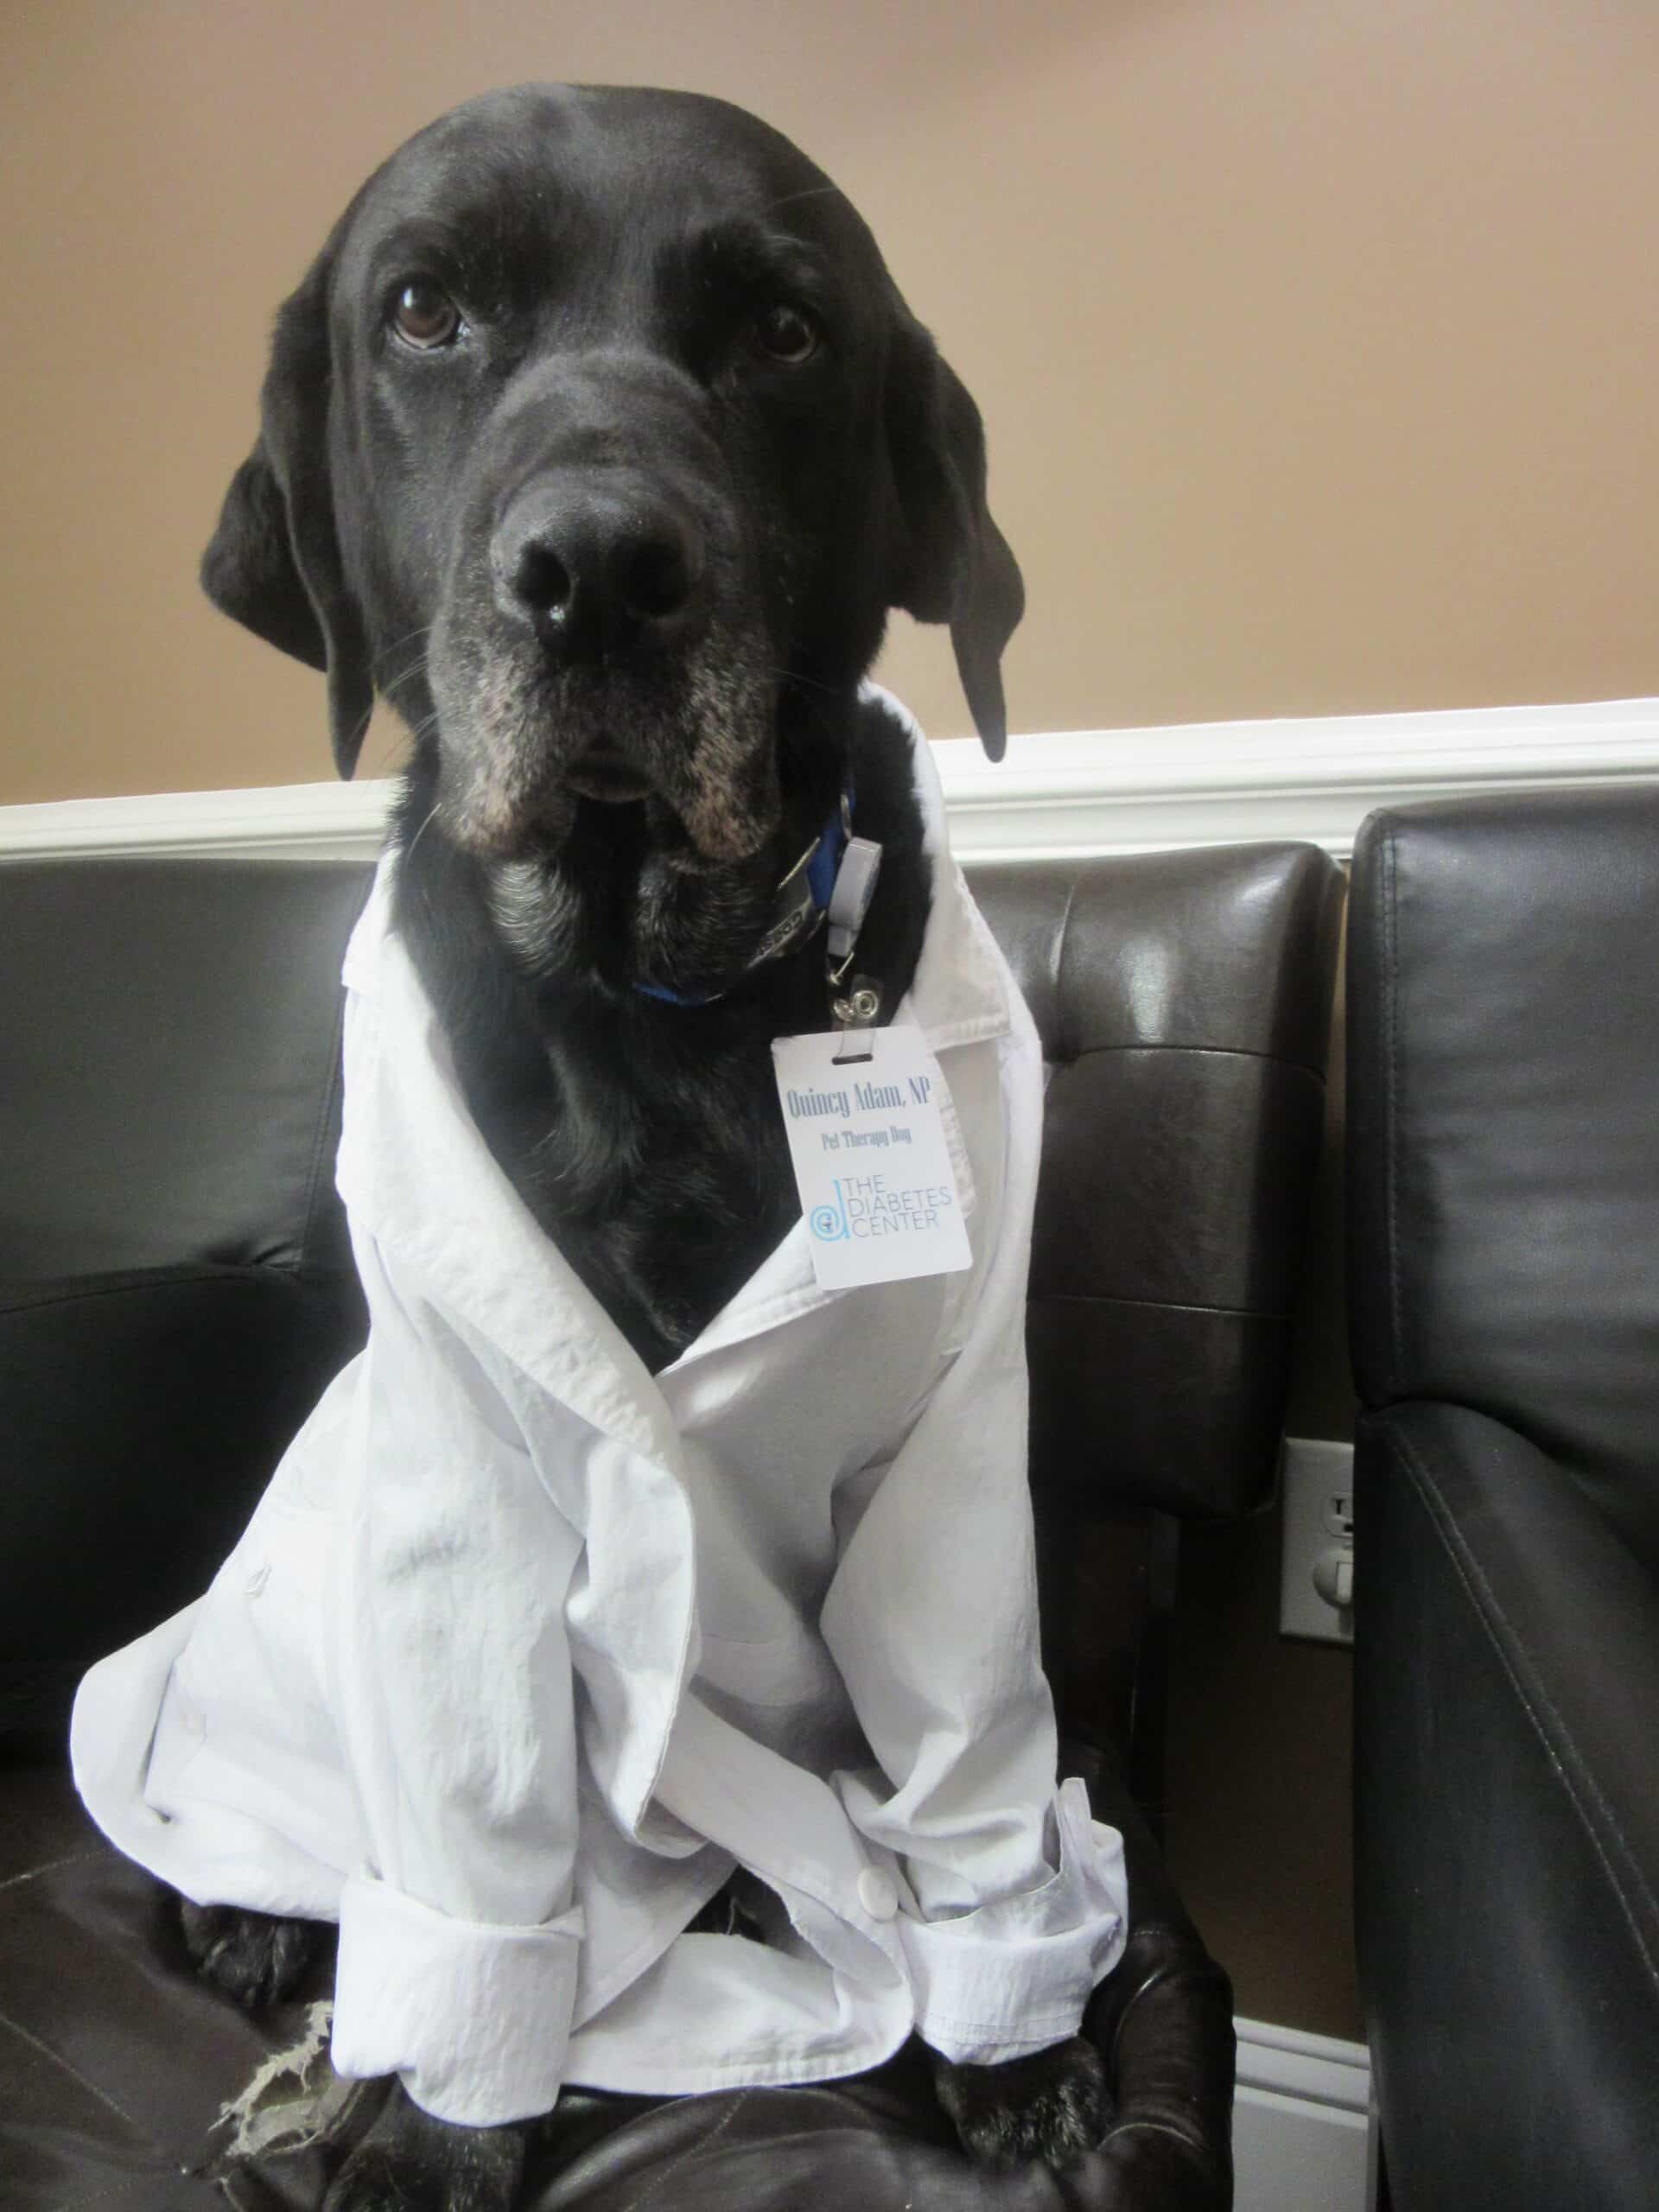 A black Lab wearing a white lab coat and an ID badge poses on a chair.